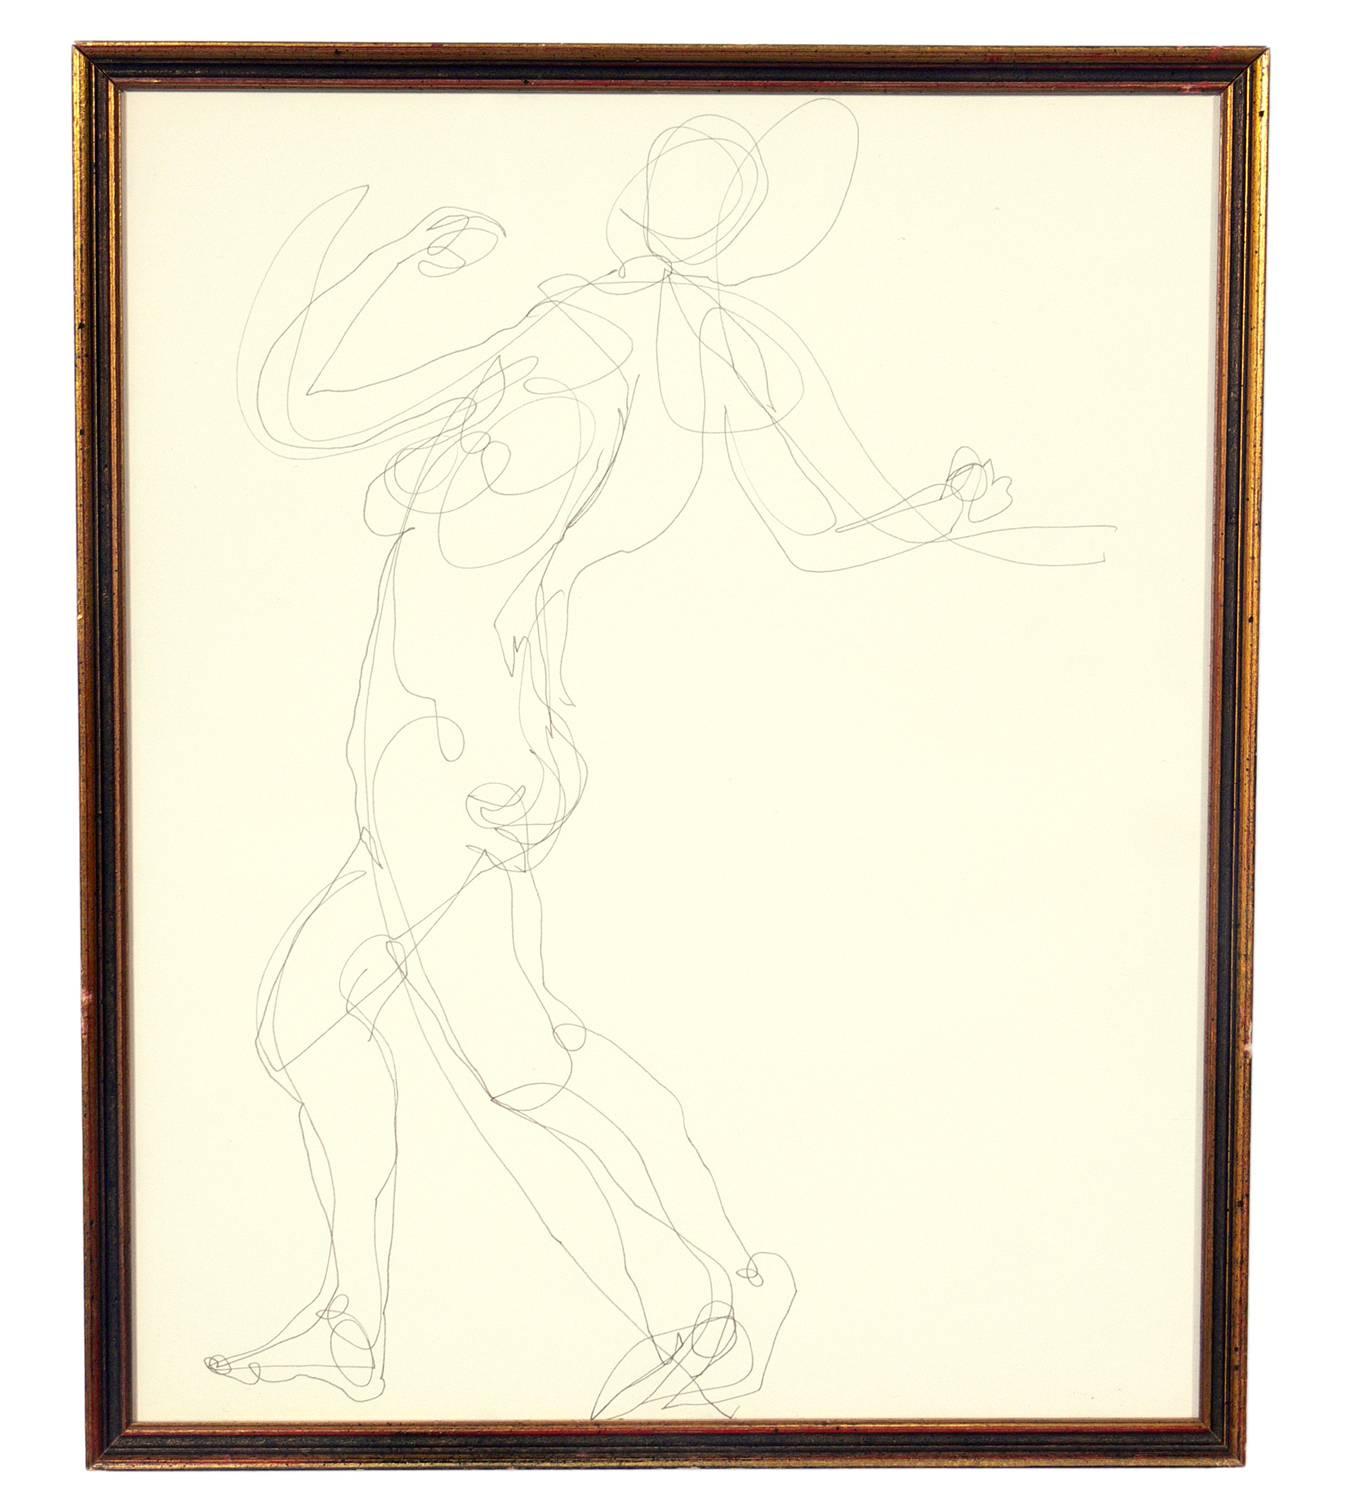 Selection of Figural Line Drawings or Gallery Wall by Miriam Kubach, American, circa 1950s. Please see our other 1stdibs listings for more Miriam Kubach works. These works, from left to right, measure 1) 16.75